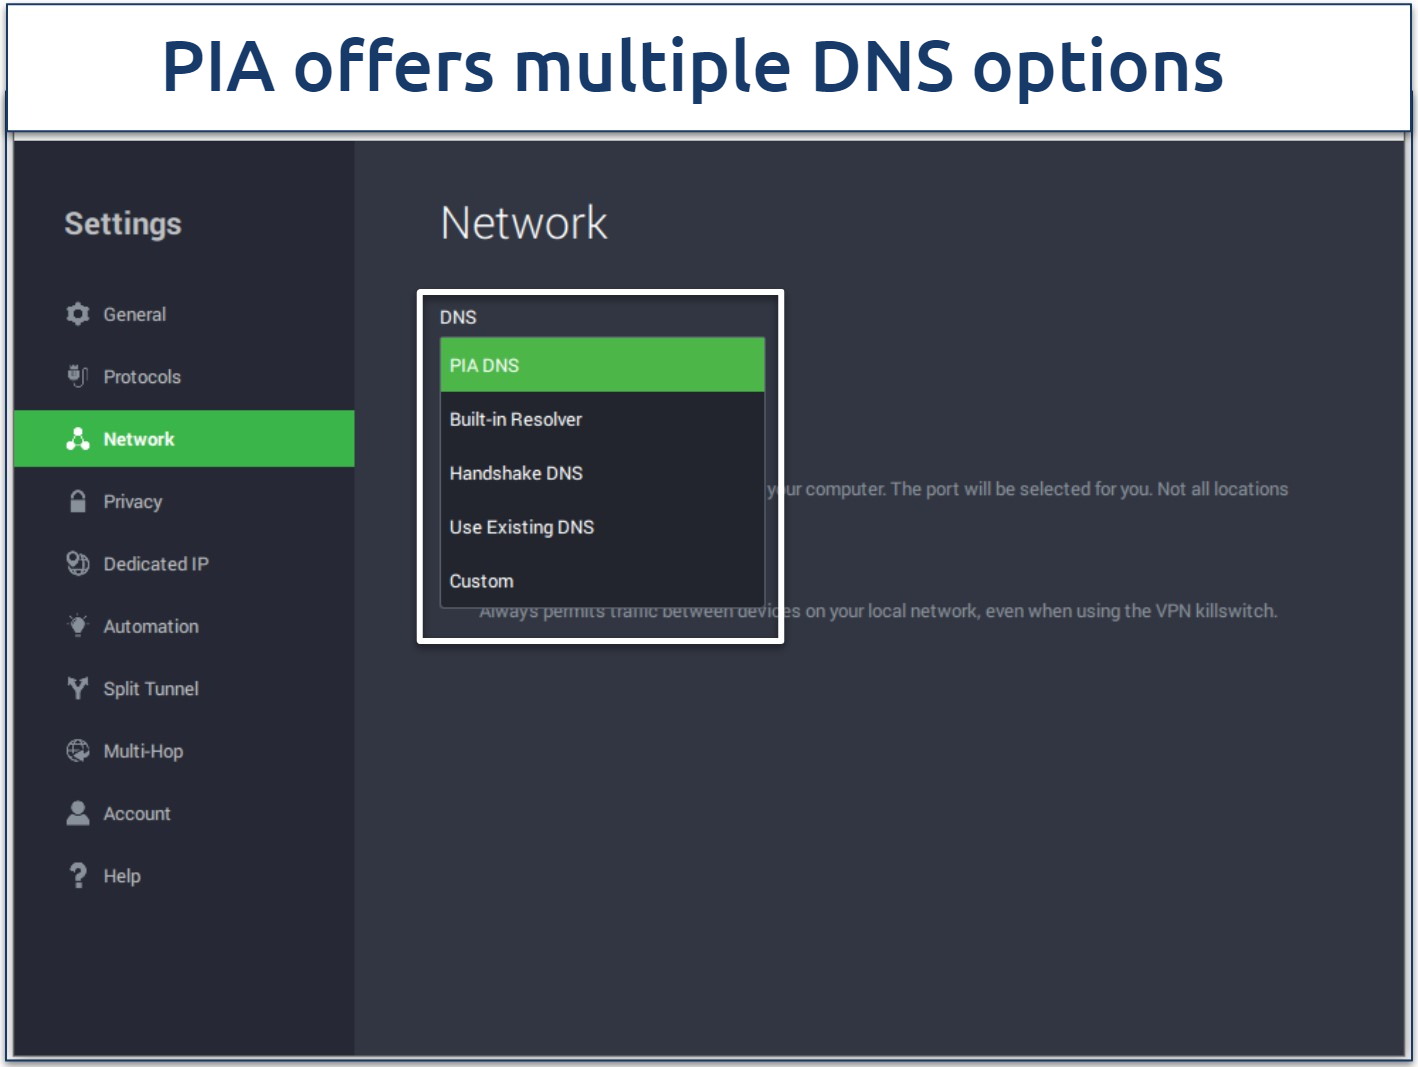 Screenshot of the PIA app showing the available options for handling DNS requests